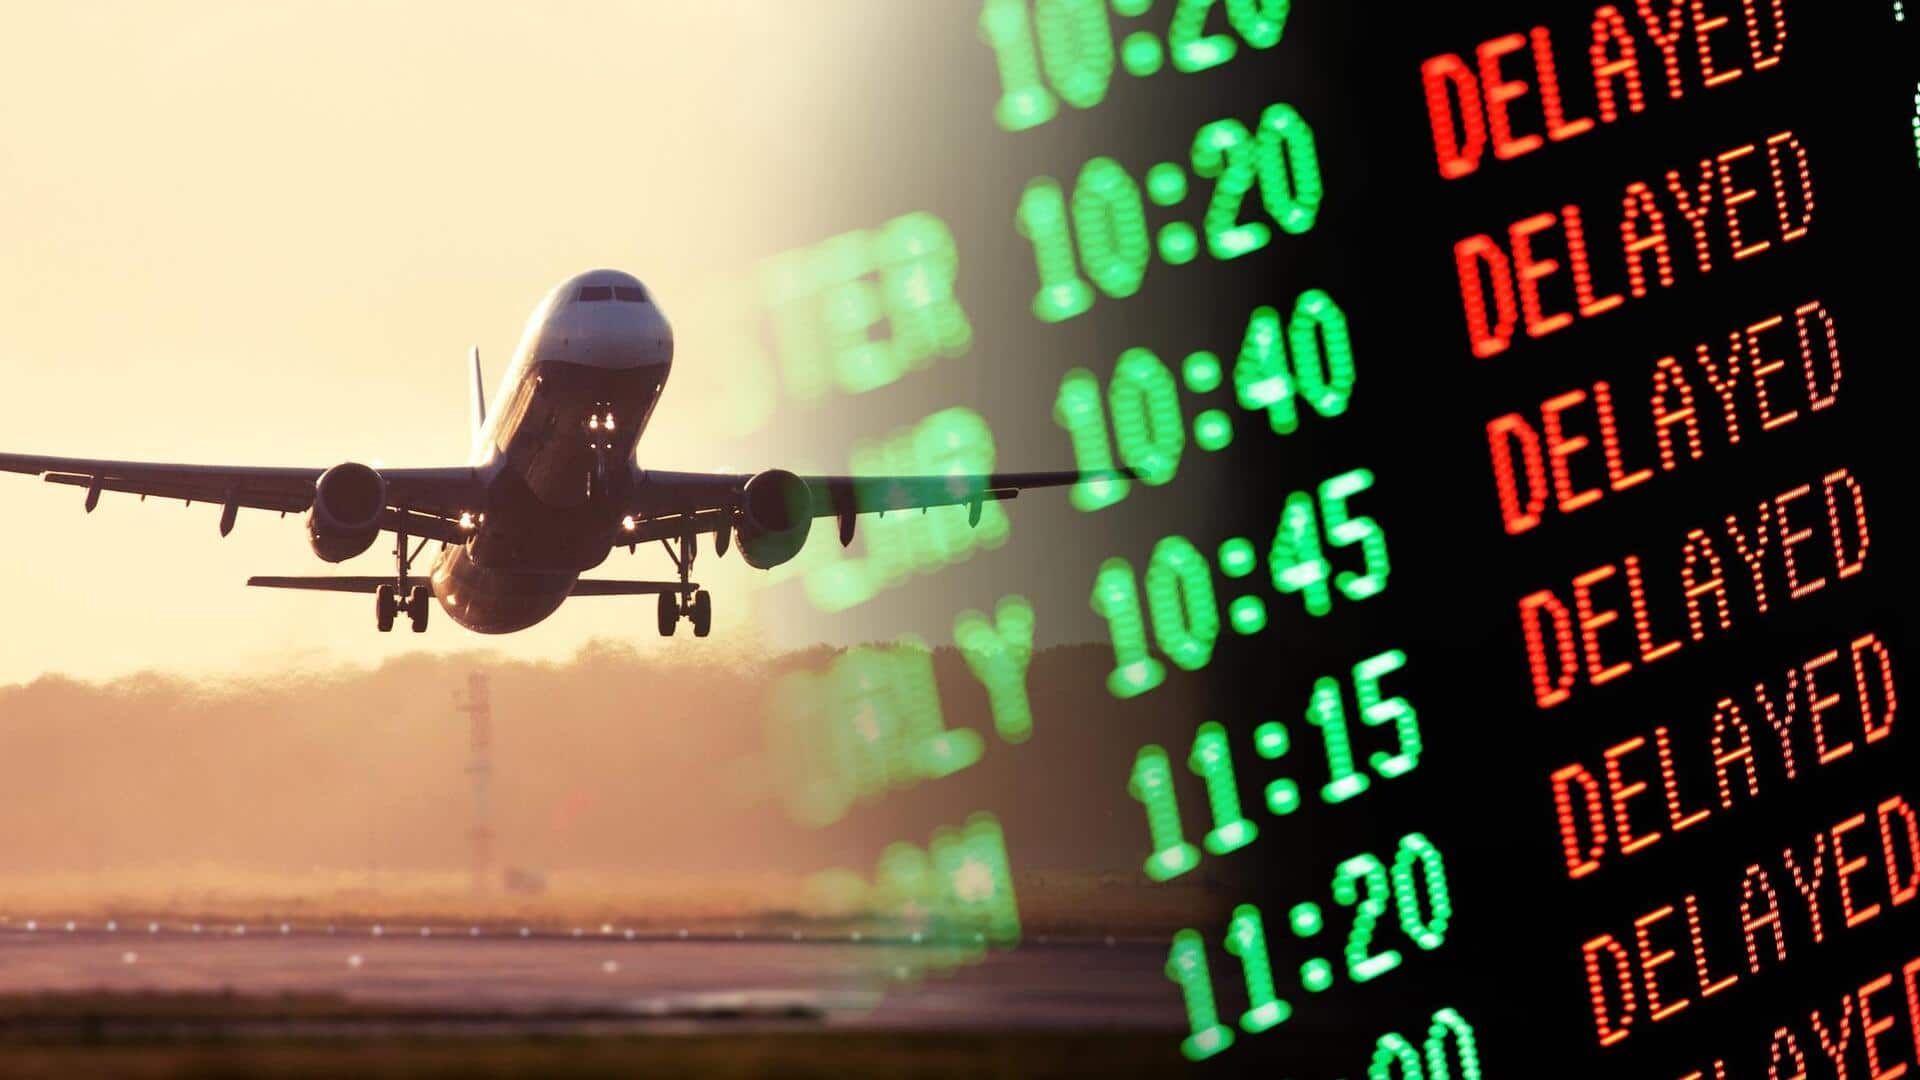 Flight canceled or delayed? Know your rights as a passenger